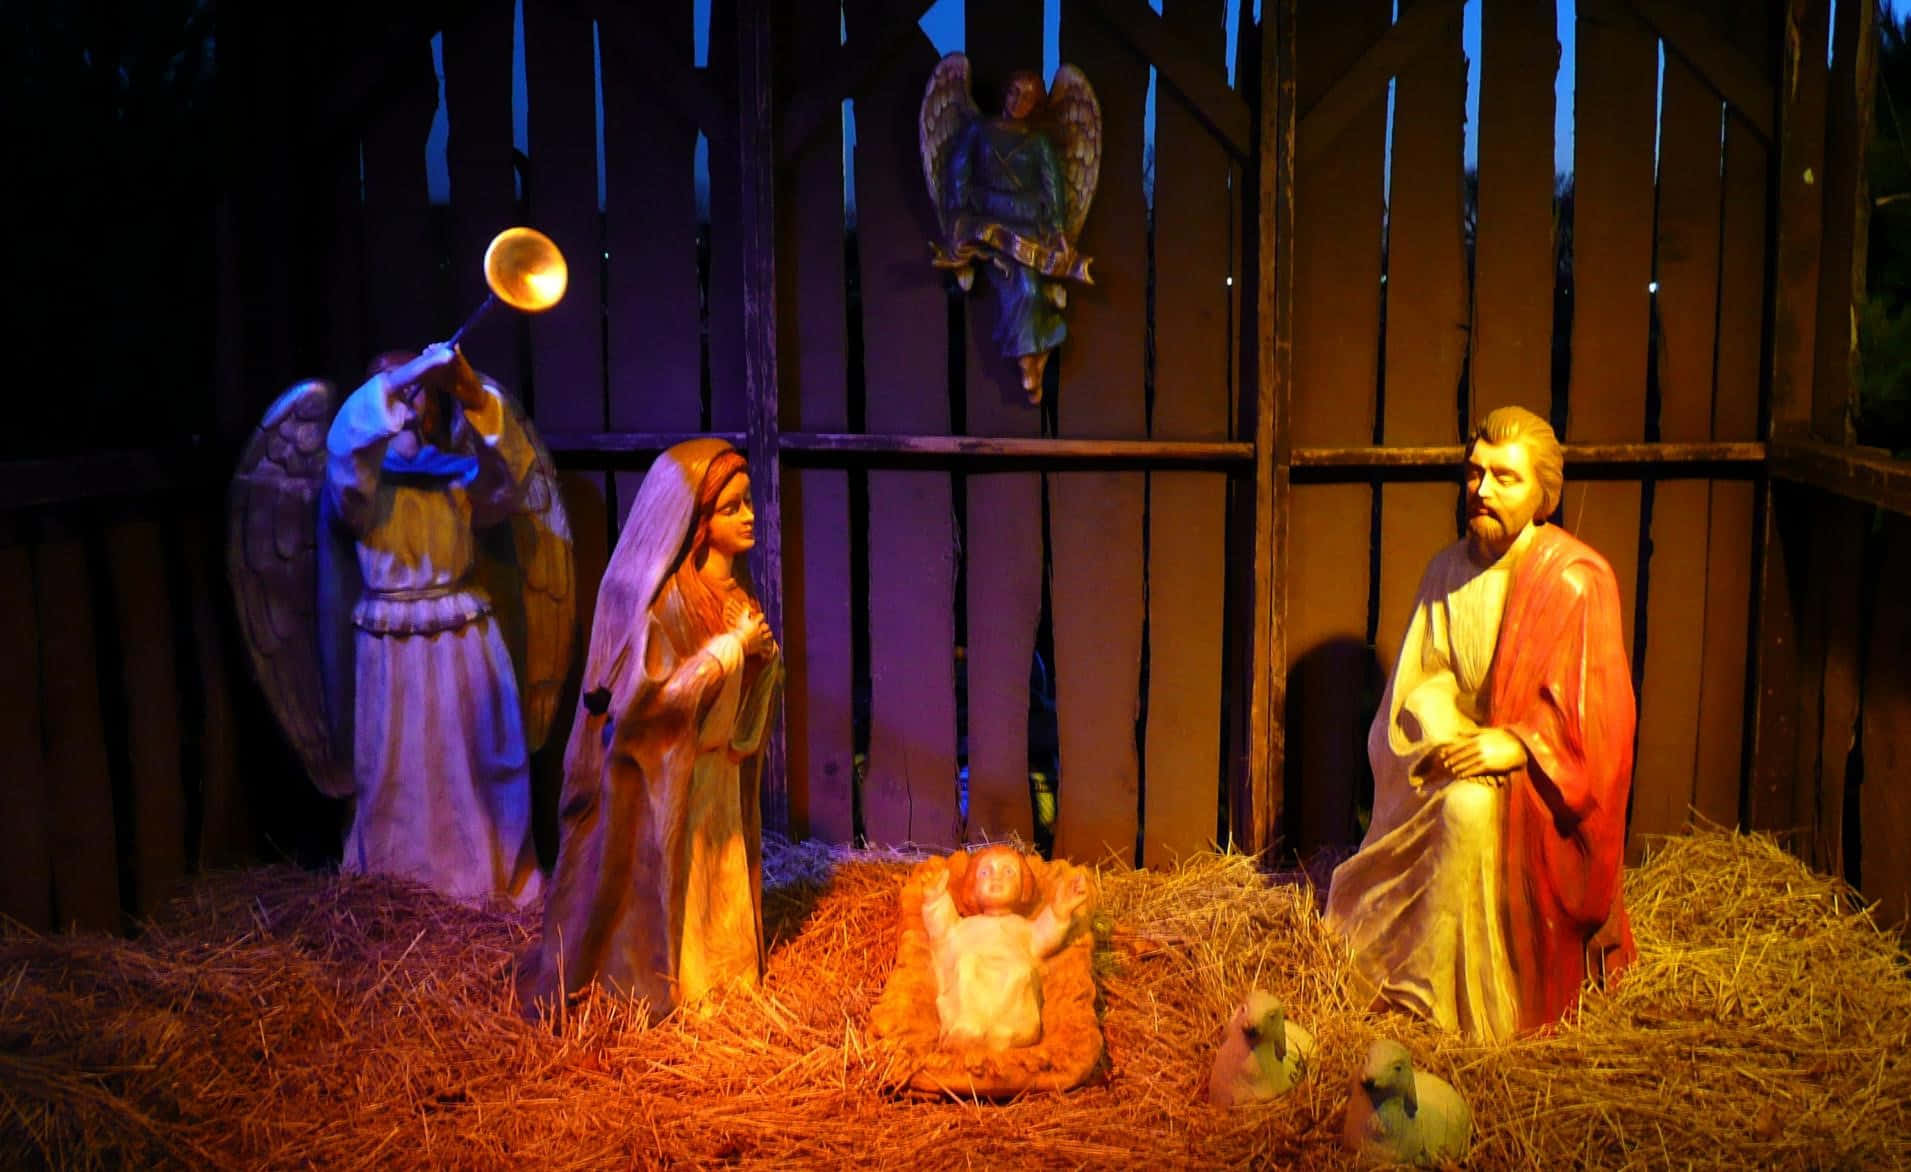 Celebrate the Reason for the Season with a Traditional Nativity Scene